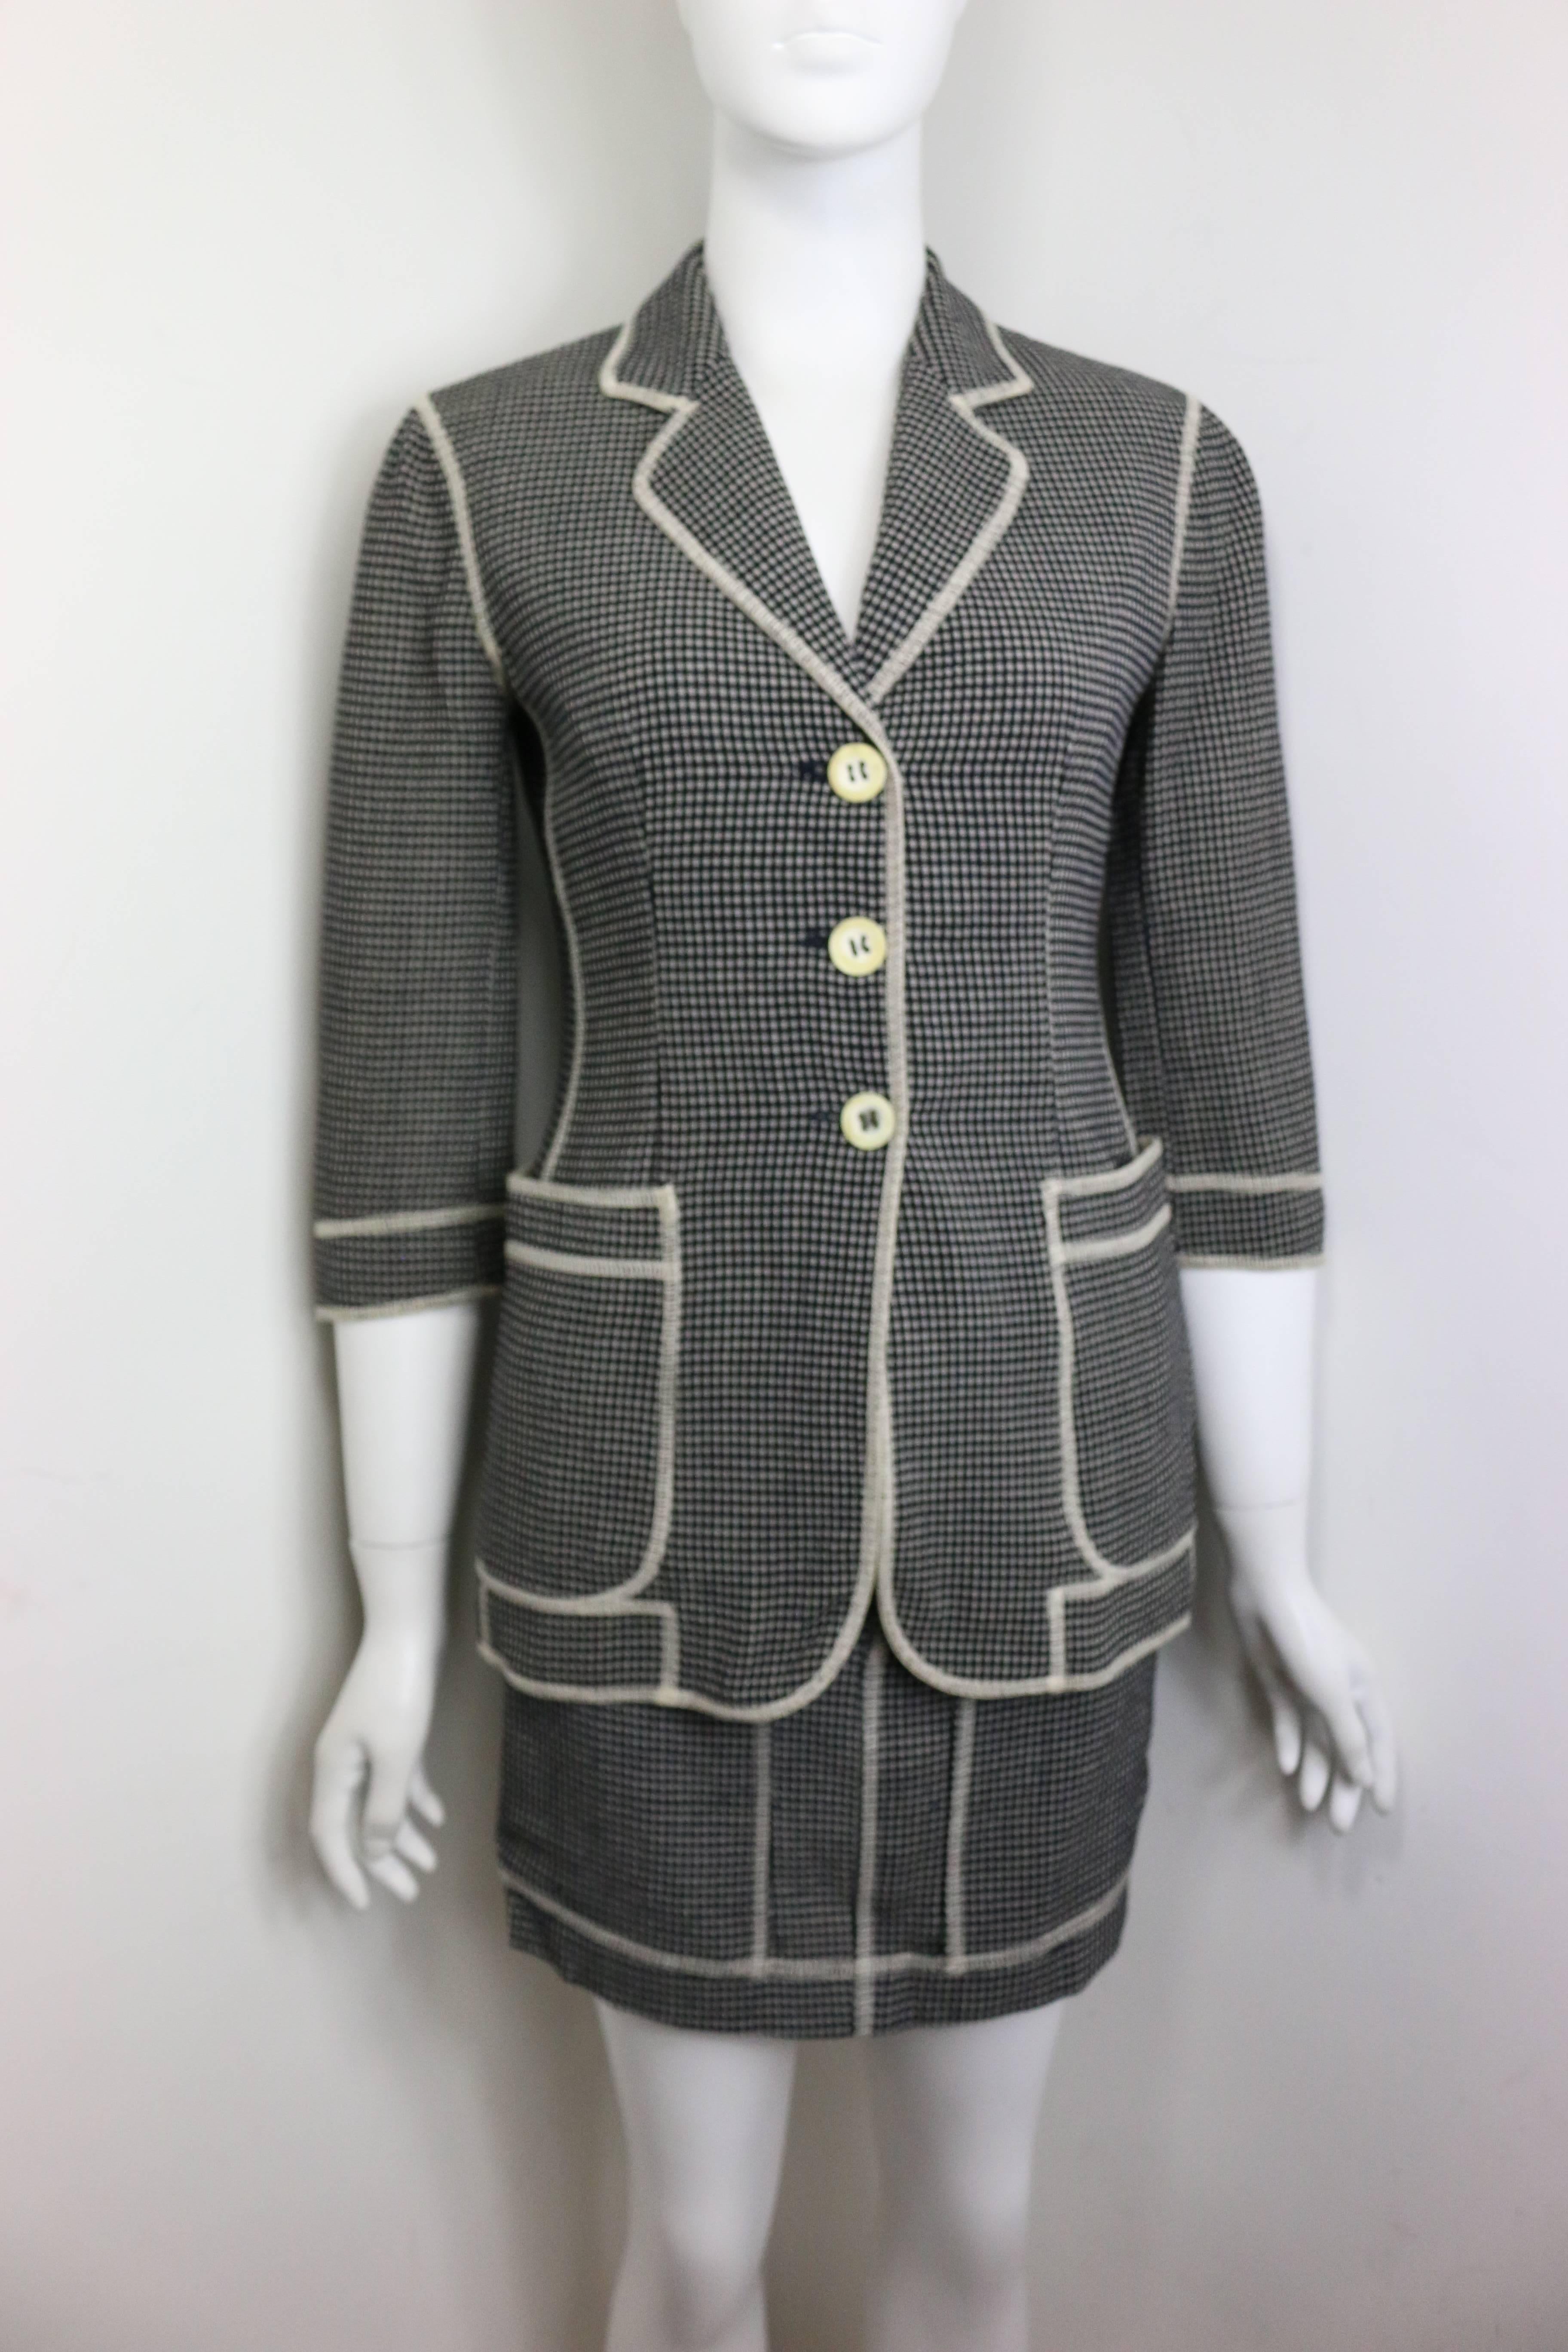 - Vintage 90s Moschino Couture in black and white check pattern with white stitches piping jacket and skirt ensemble. The jacket is three quarter sleeves. The word 